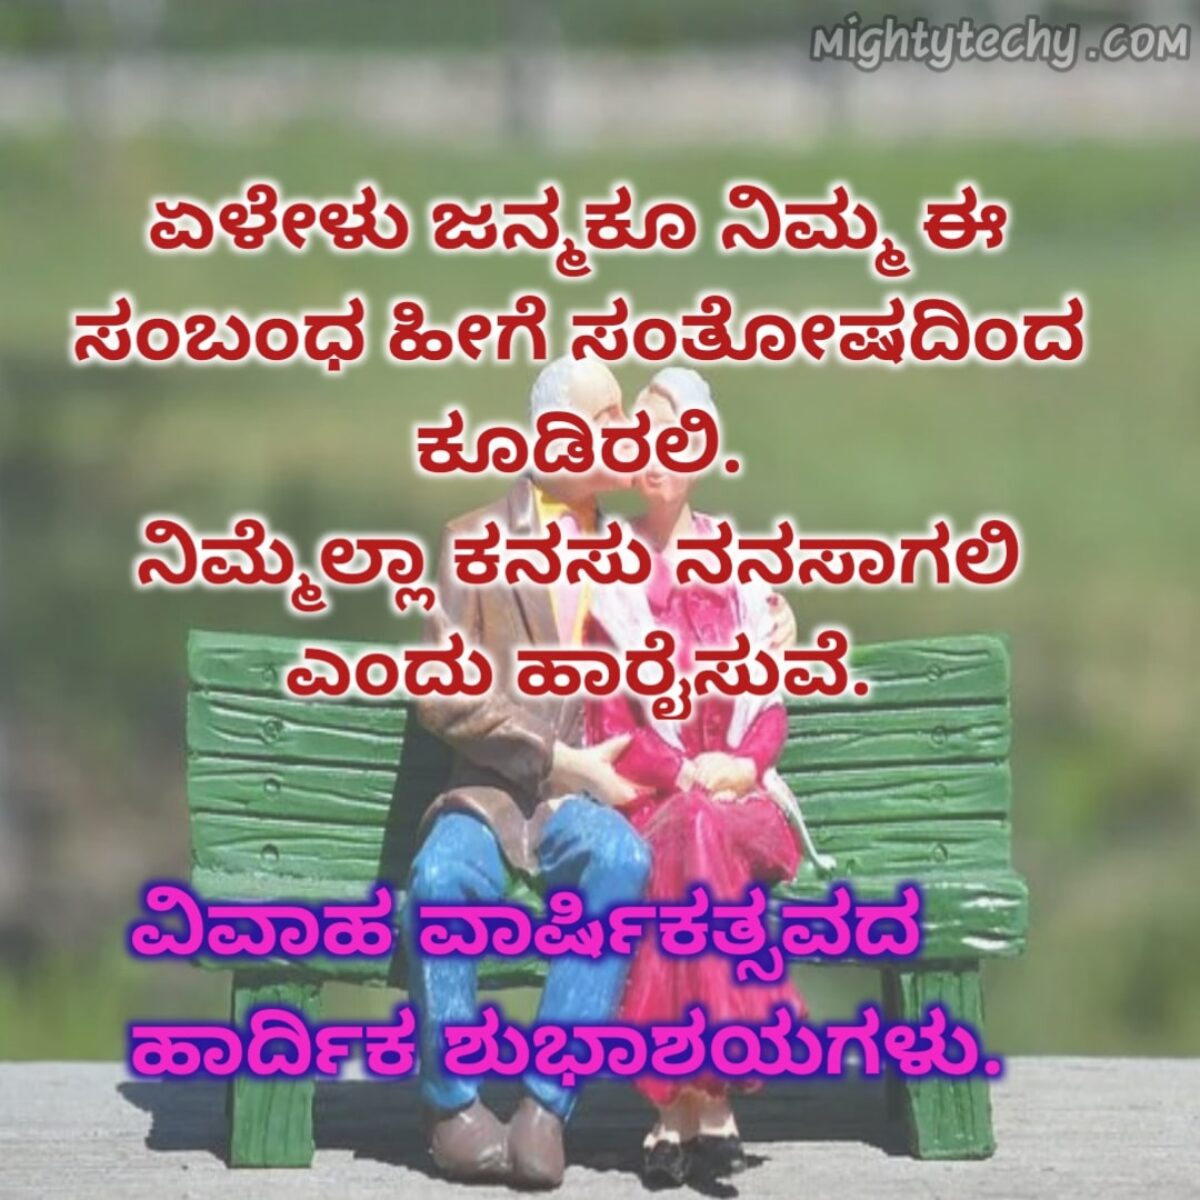 wedding-anniversary-wishes-in-kannada-cheapest-prices-save-49-jlcatj-gob-mx